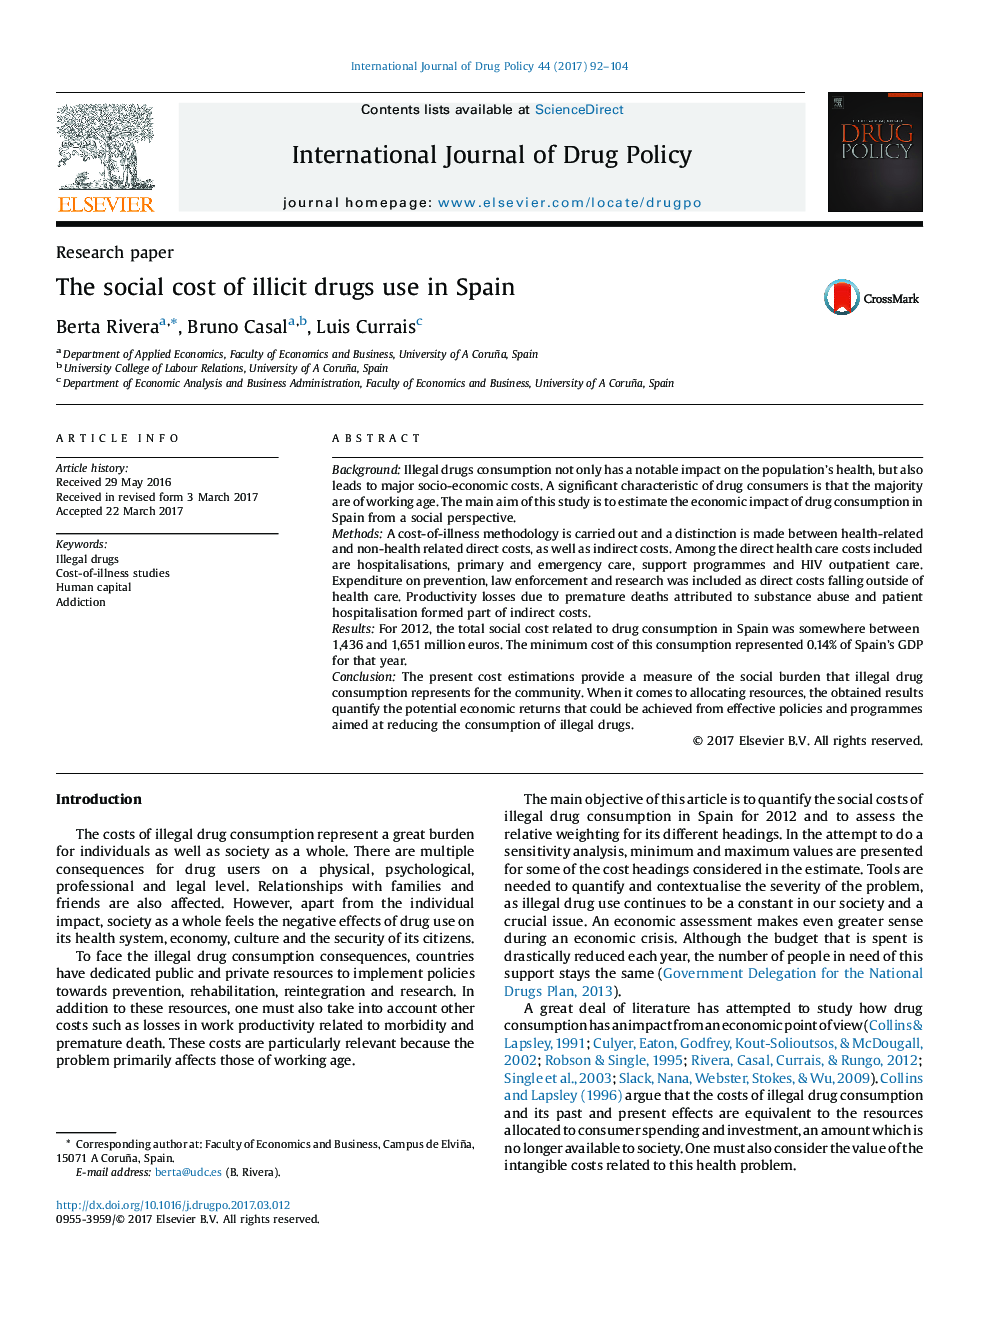 The social cost of illicit drugs use in Spain